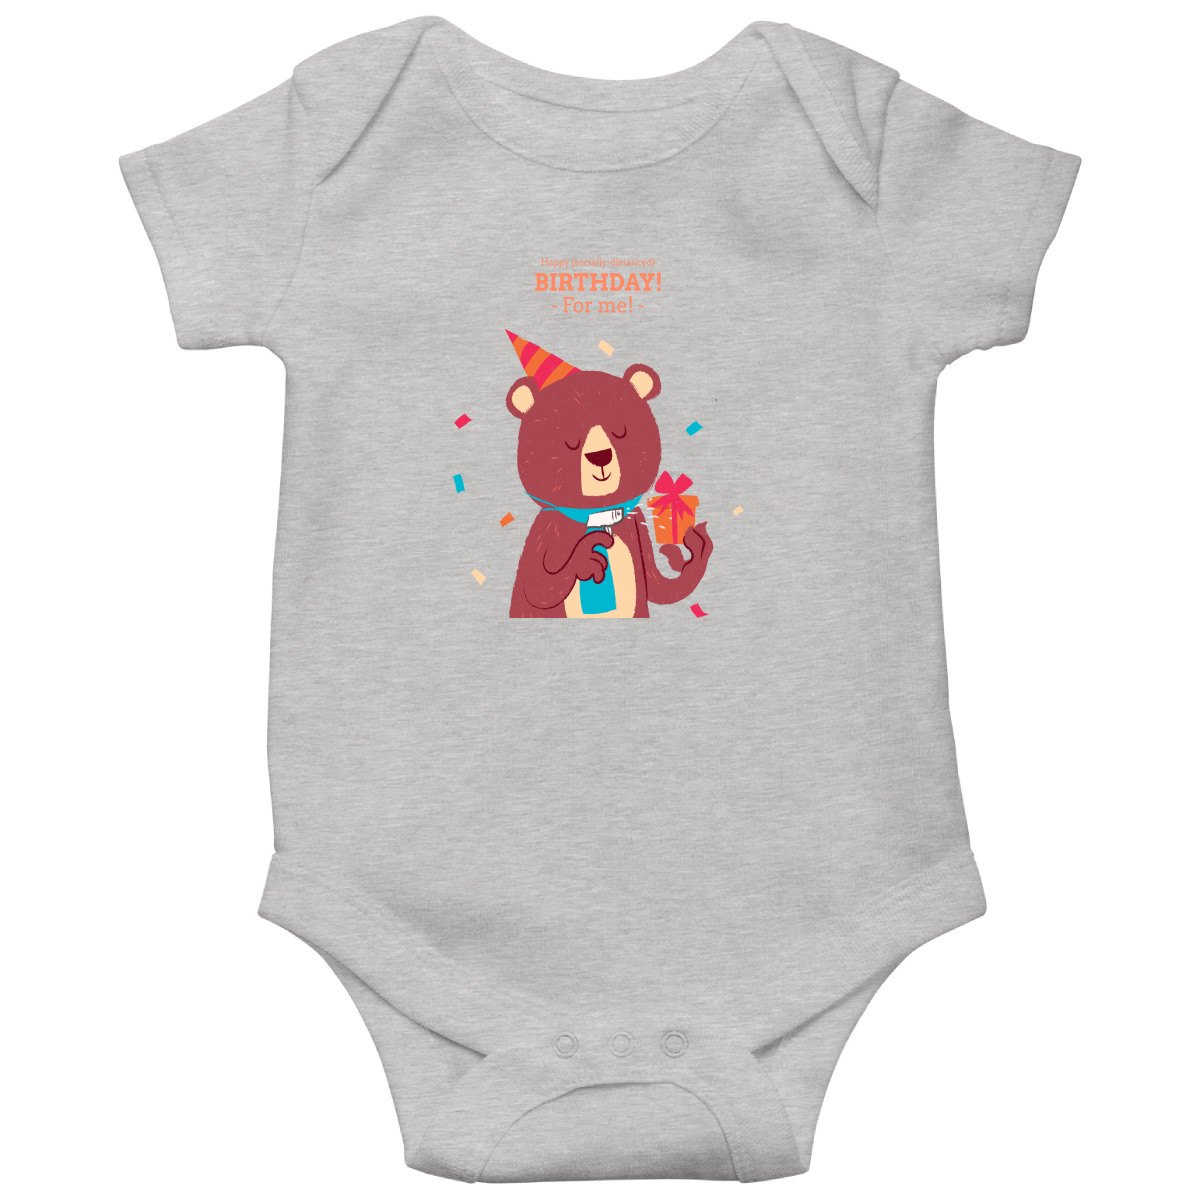 Happy (social distanced) birthday for me  Baby Bodysuits | Gray